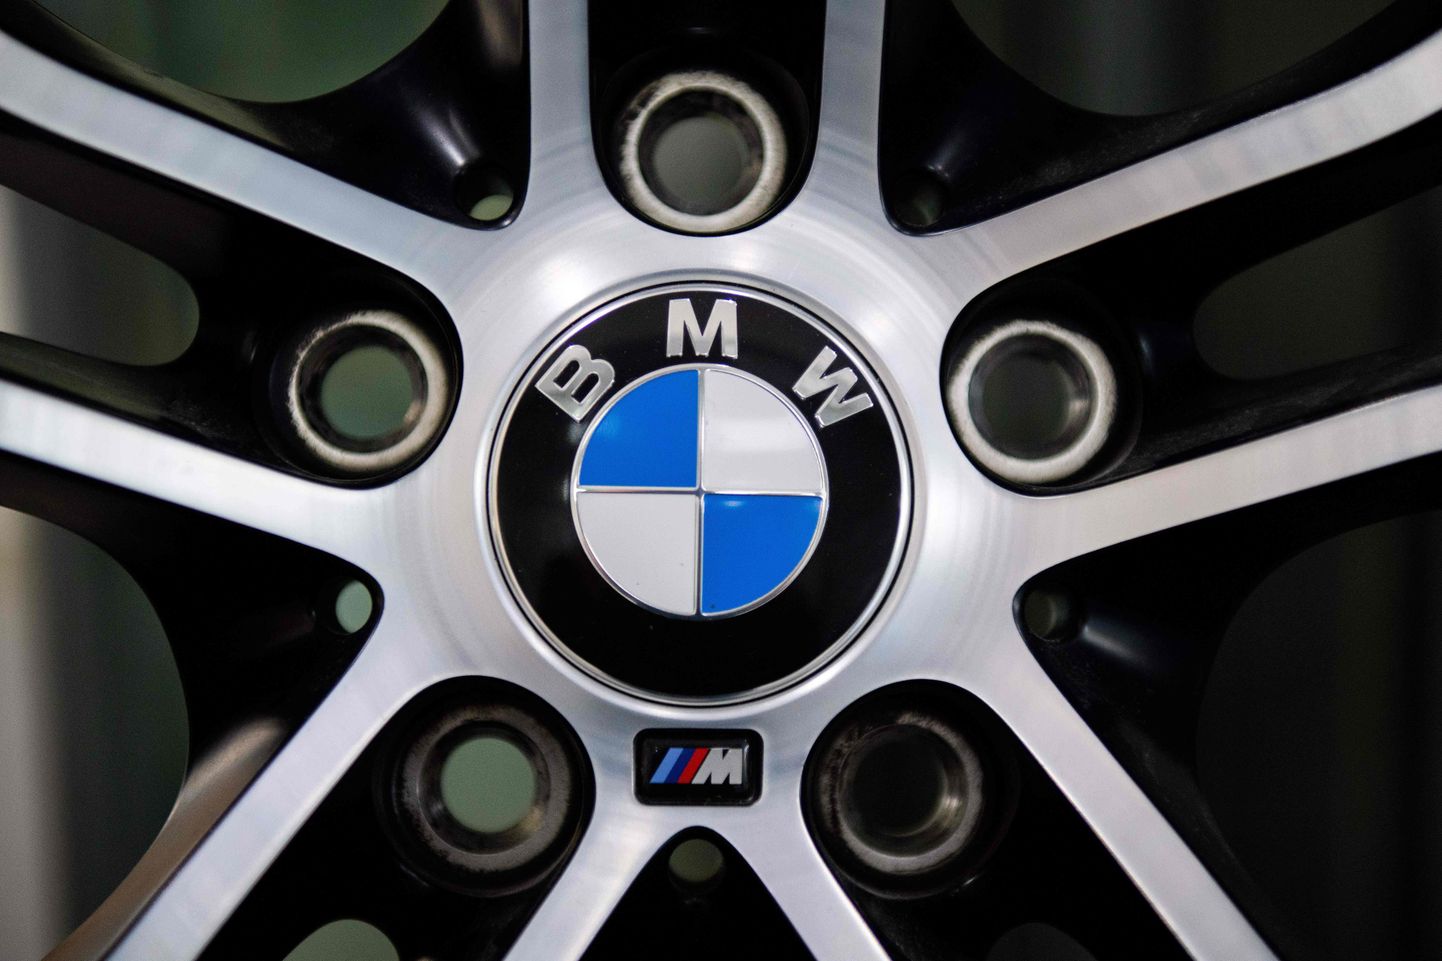 Detail on a BMW wheel trim is seen at the German automaker's dealership in Beijing on October 11, 2018. - German luxury carmaker BMW announced on October 11 a plan to take control of its China joint-venture, the first foreign automaker to take advantage of Beijing's new ownership rules for the sector. (Photo by Nicolas ASFOURI / AFP)